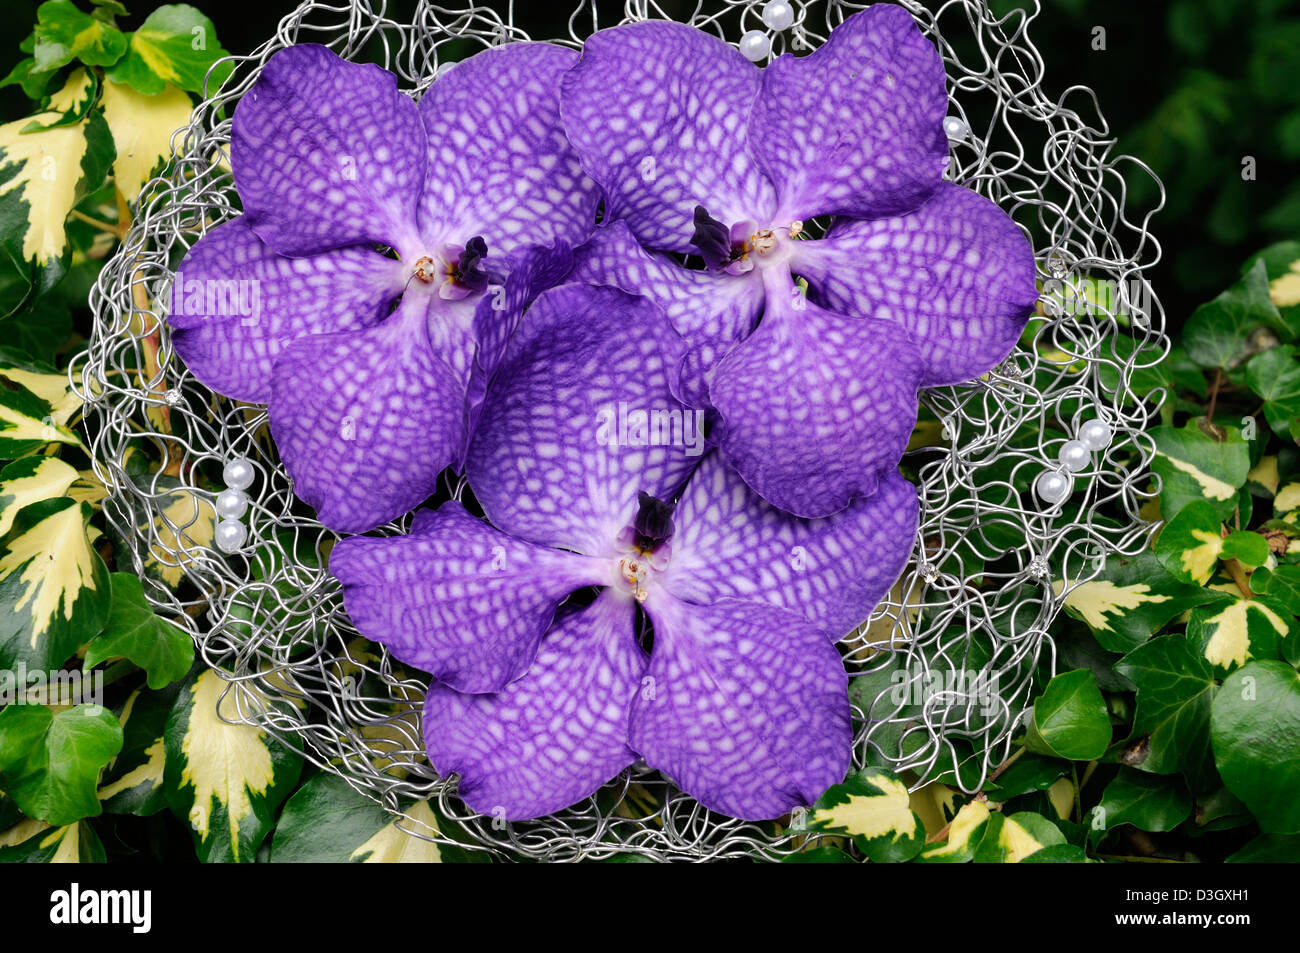 vanda rothschildiana orchid flowers blooms purple white petals flowers orchids exotic tropical bridal bouquet attractive flower Stock Photo